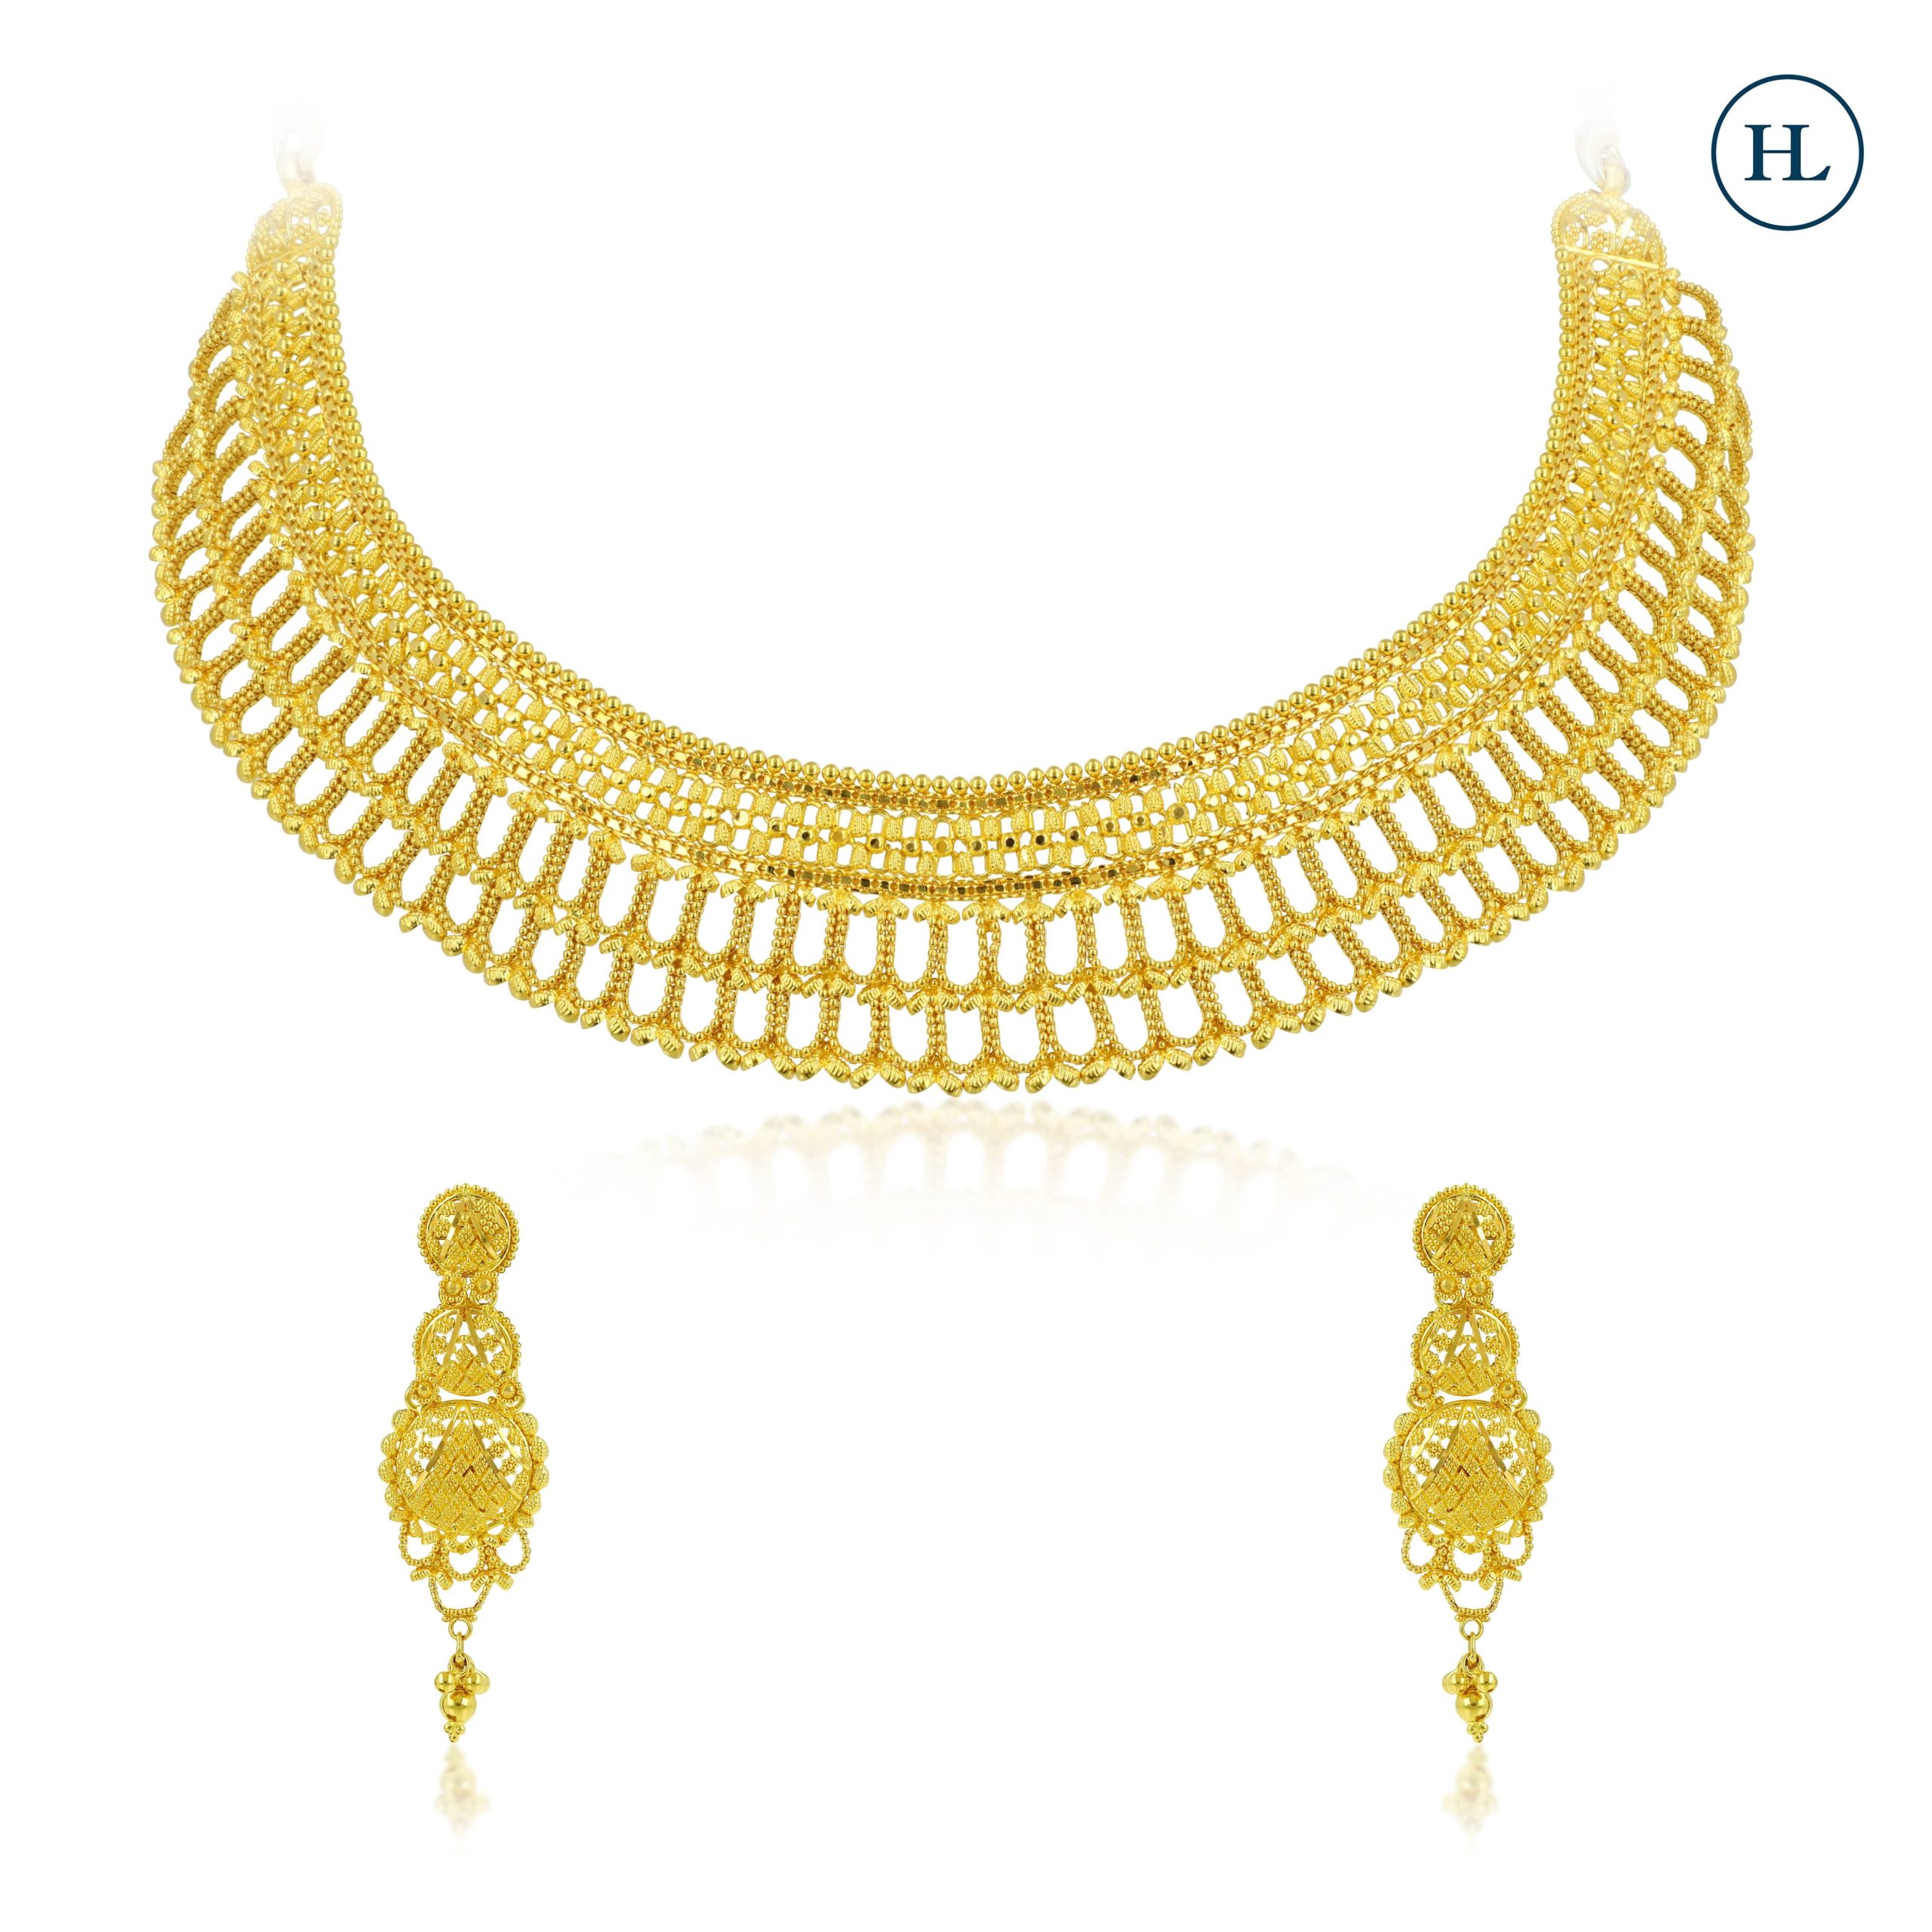 Gold Jewellery: Make Each Moment Memorable